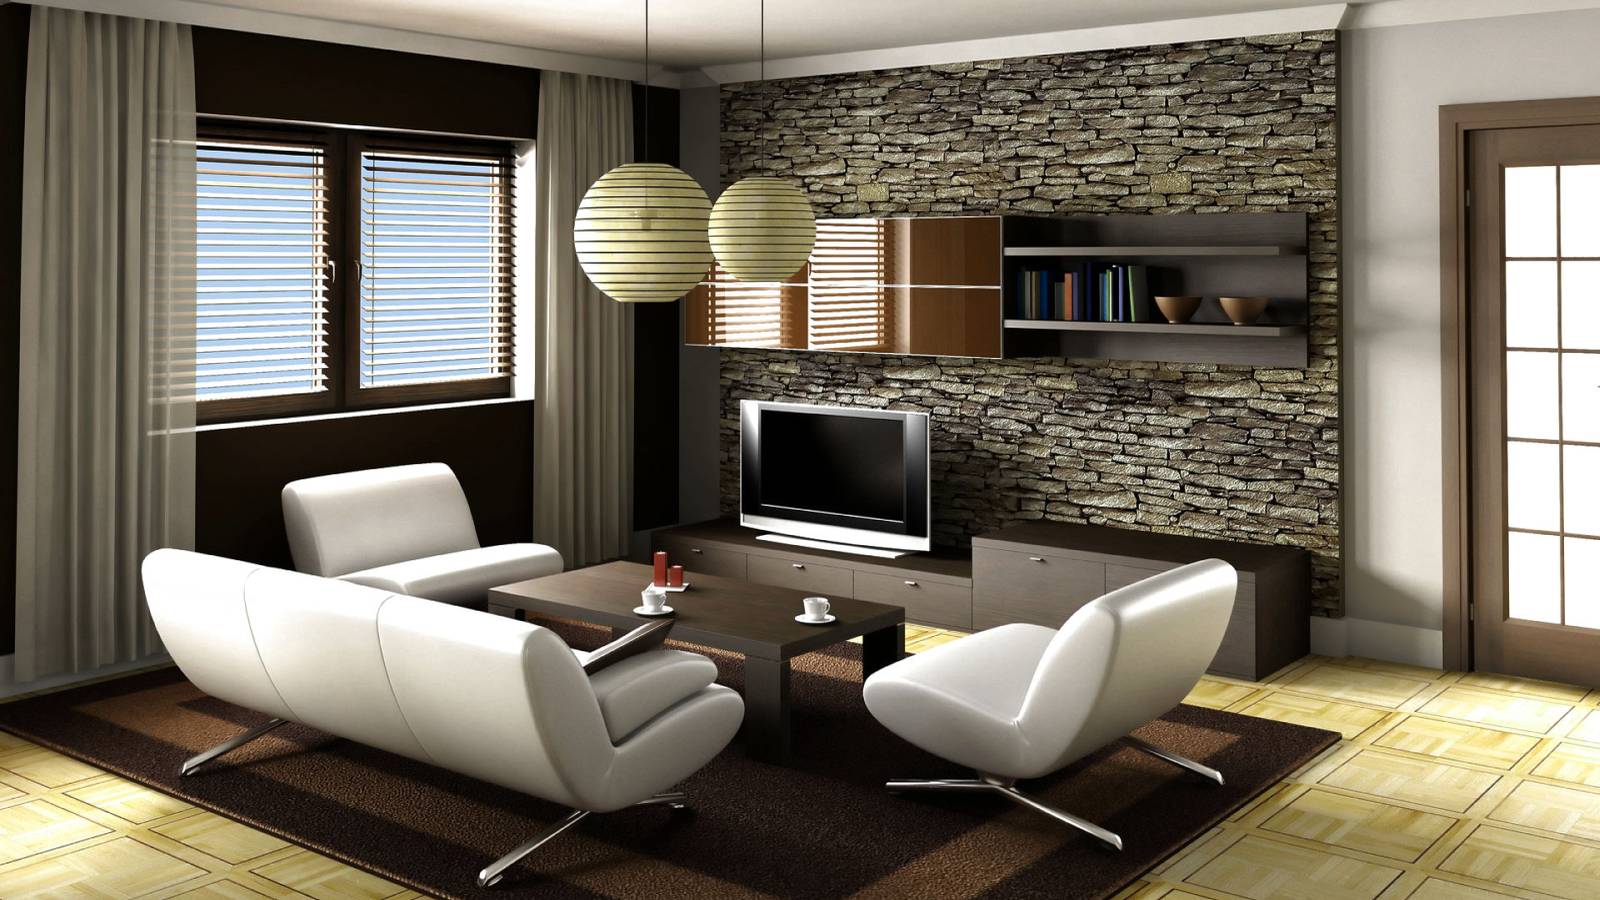 17 Cool Modern Living Room Ideas For Different Home Types - Interior